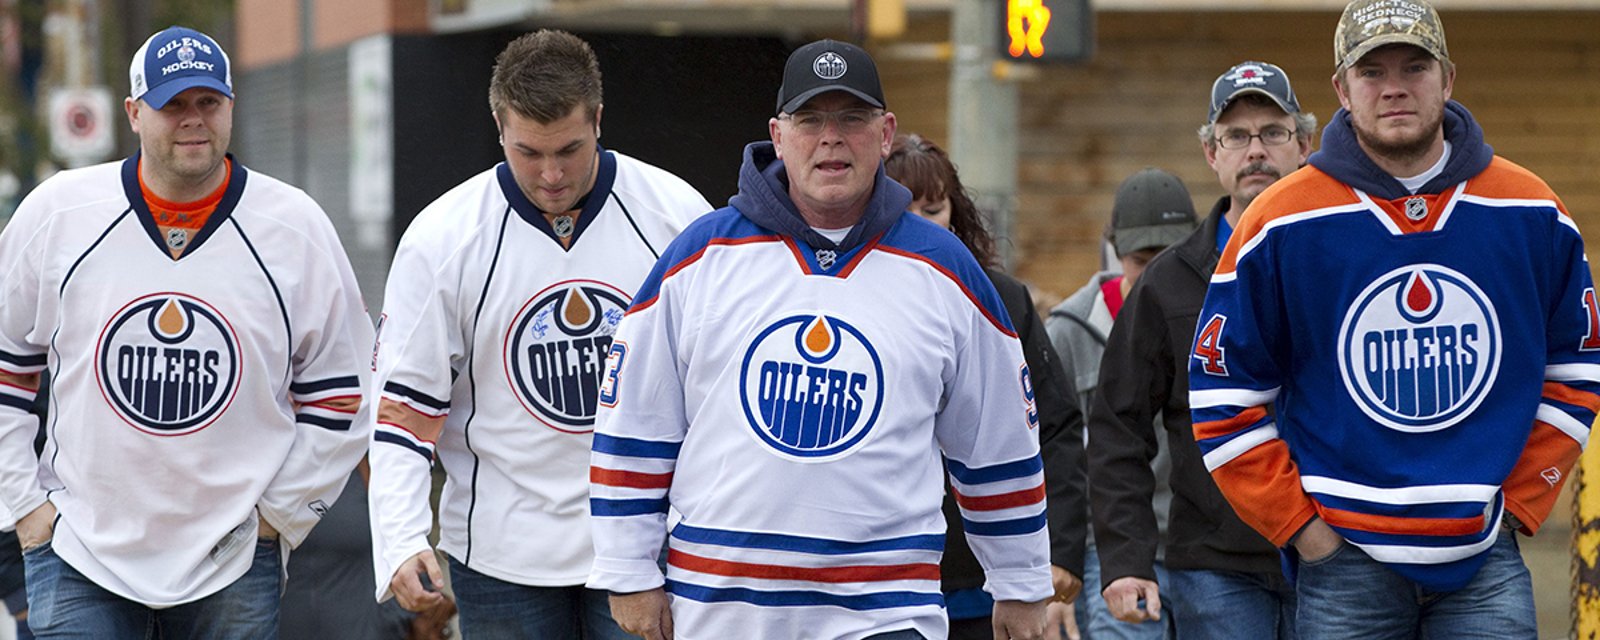 It's Oilers day at Hockey Feed!